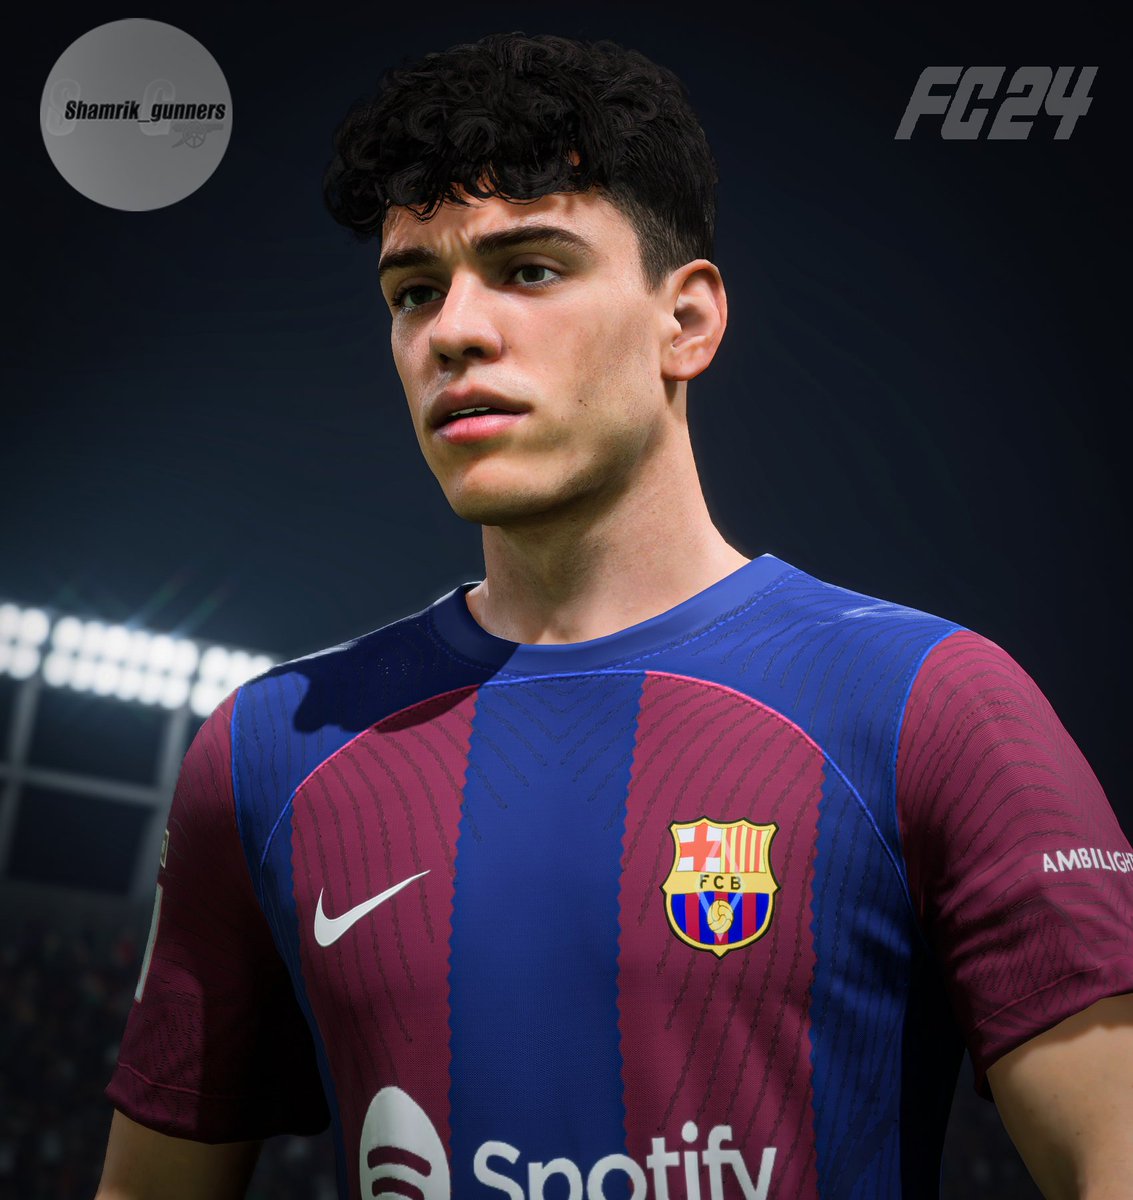 Héctor Fort - Release🔥🔥🔥 #EAFC4 & #FIFA23 🇪🇸 🖇️Download link in bio! Available for EA FC24 and FIFA 23! #FC24 #EAFC24 #FUT @FIFER_Mods